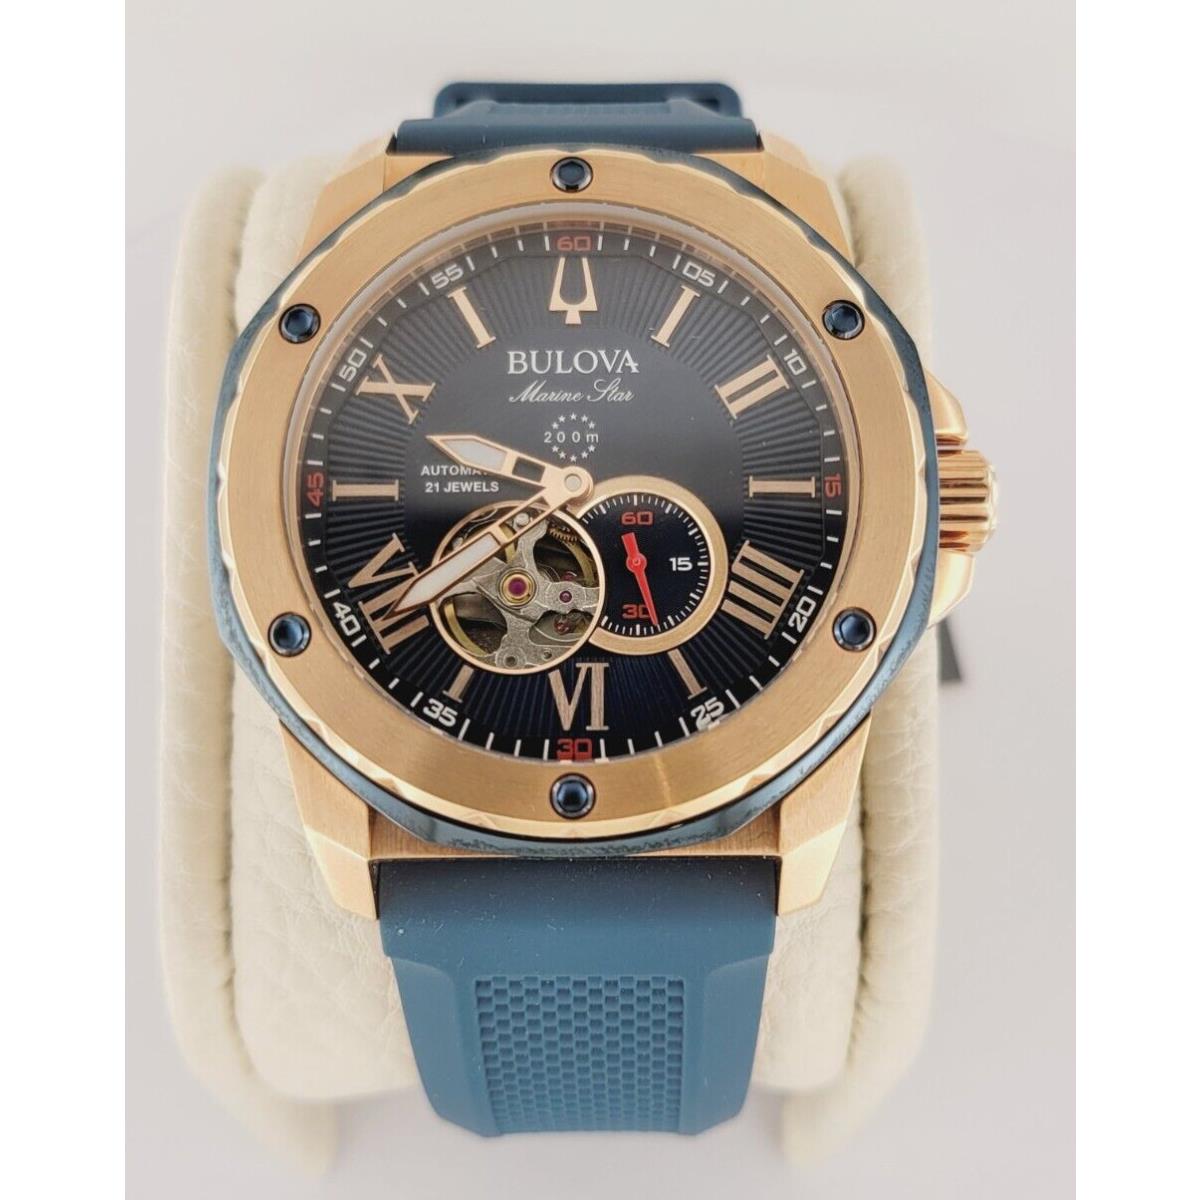 Bulova 98A227 Marine Star Silicone Strap Watch 45mm Men`s Automatic Watch - Dial: Blue, Band: Blue